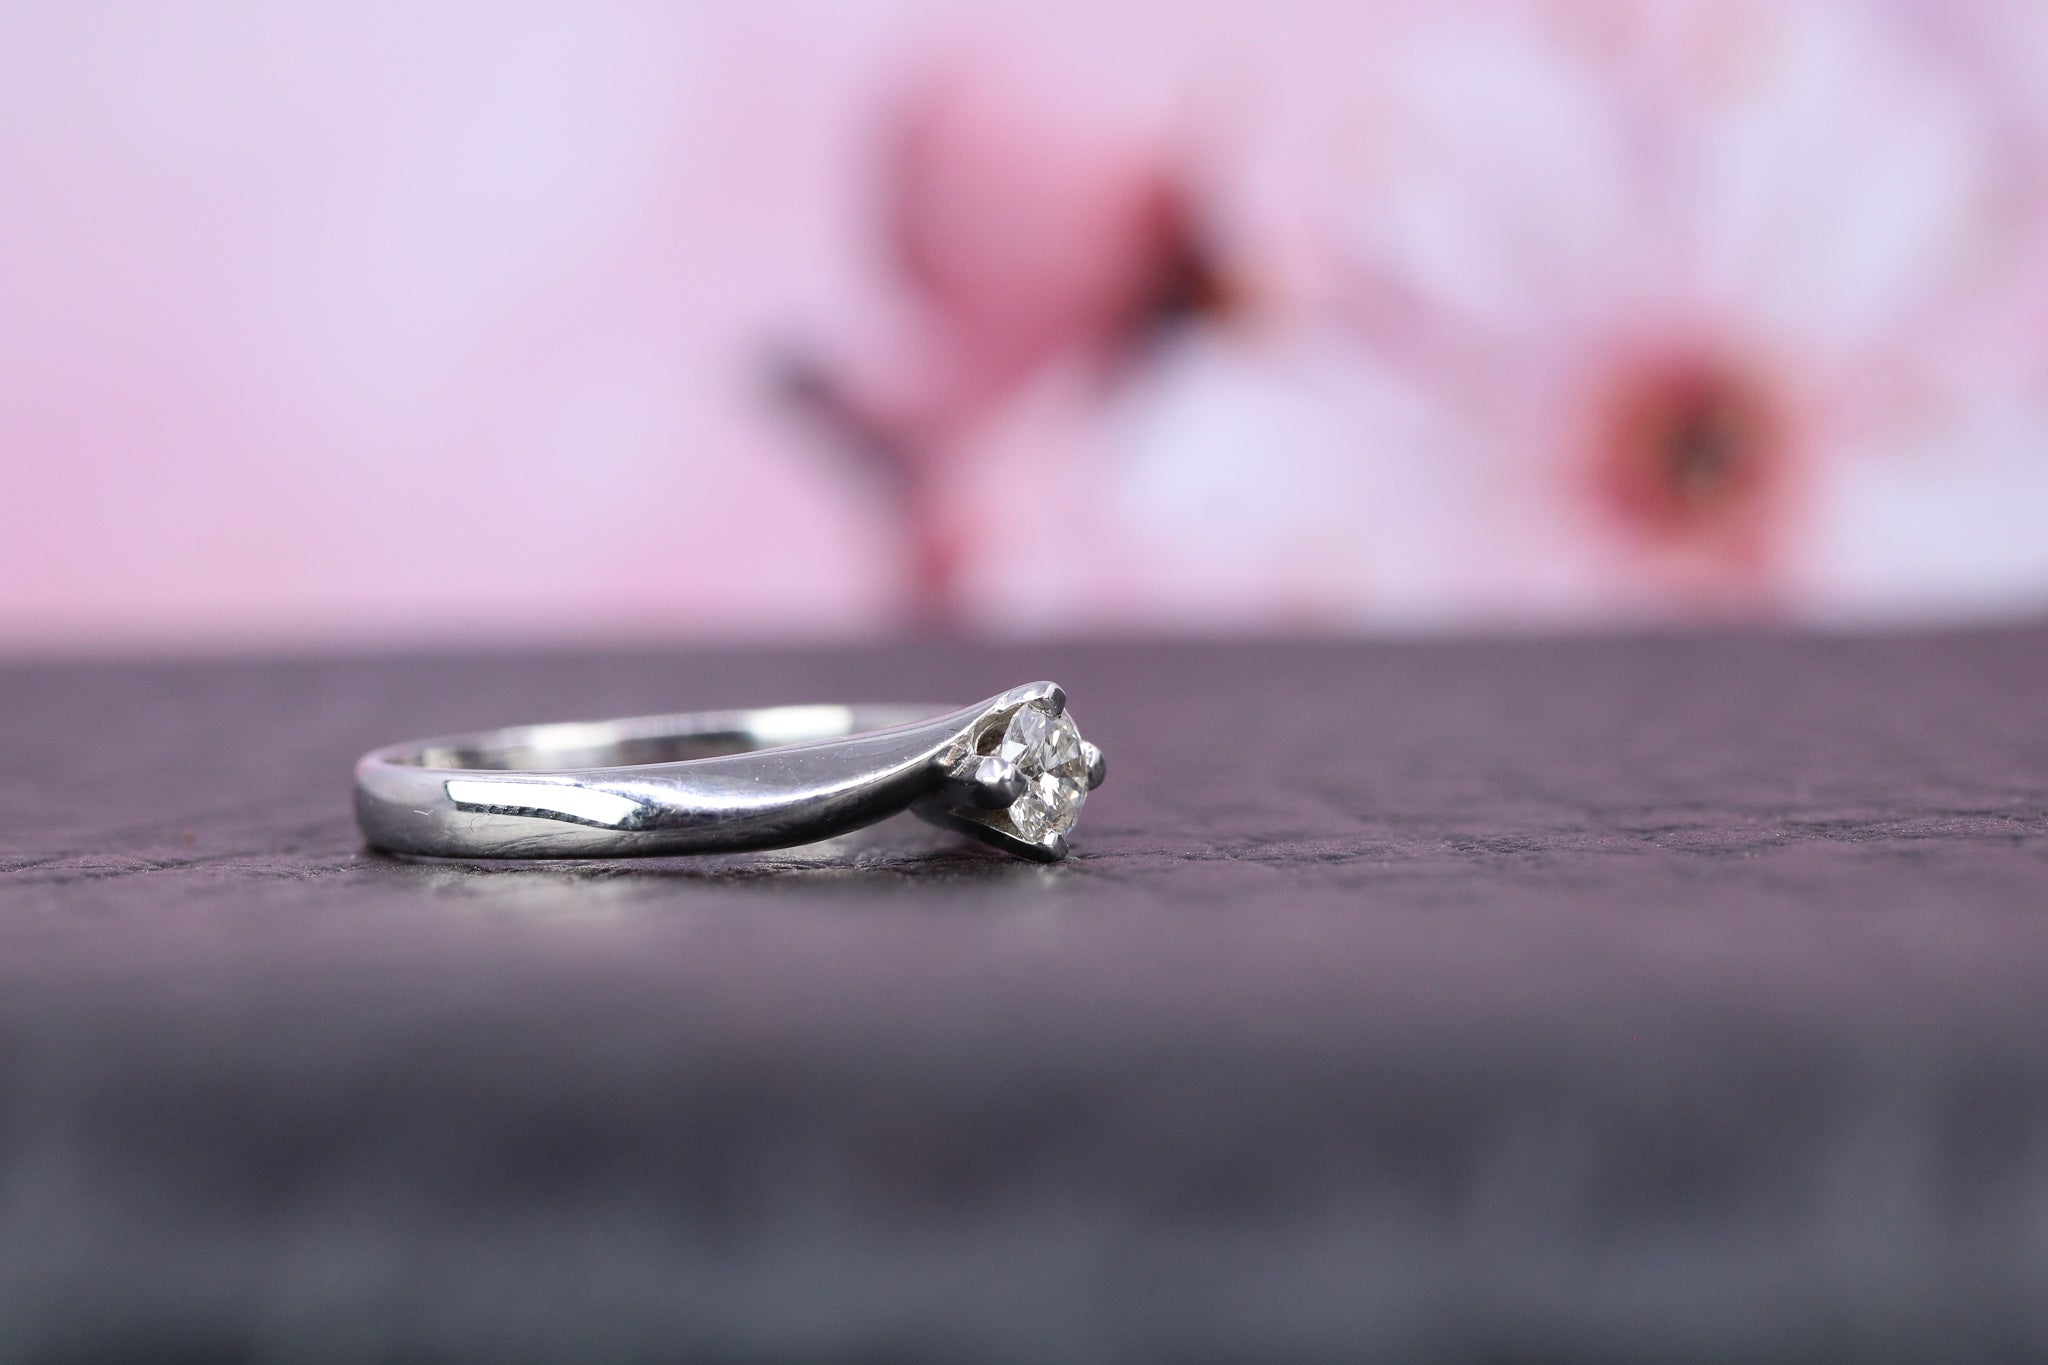 18ct White Gold & Diamond Ring - W6076 - Hallmark Jewellers Formby & The Jewellers Bench Widnes